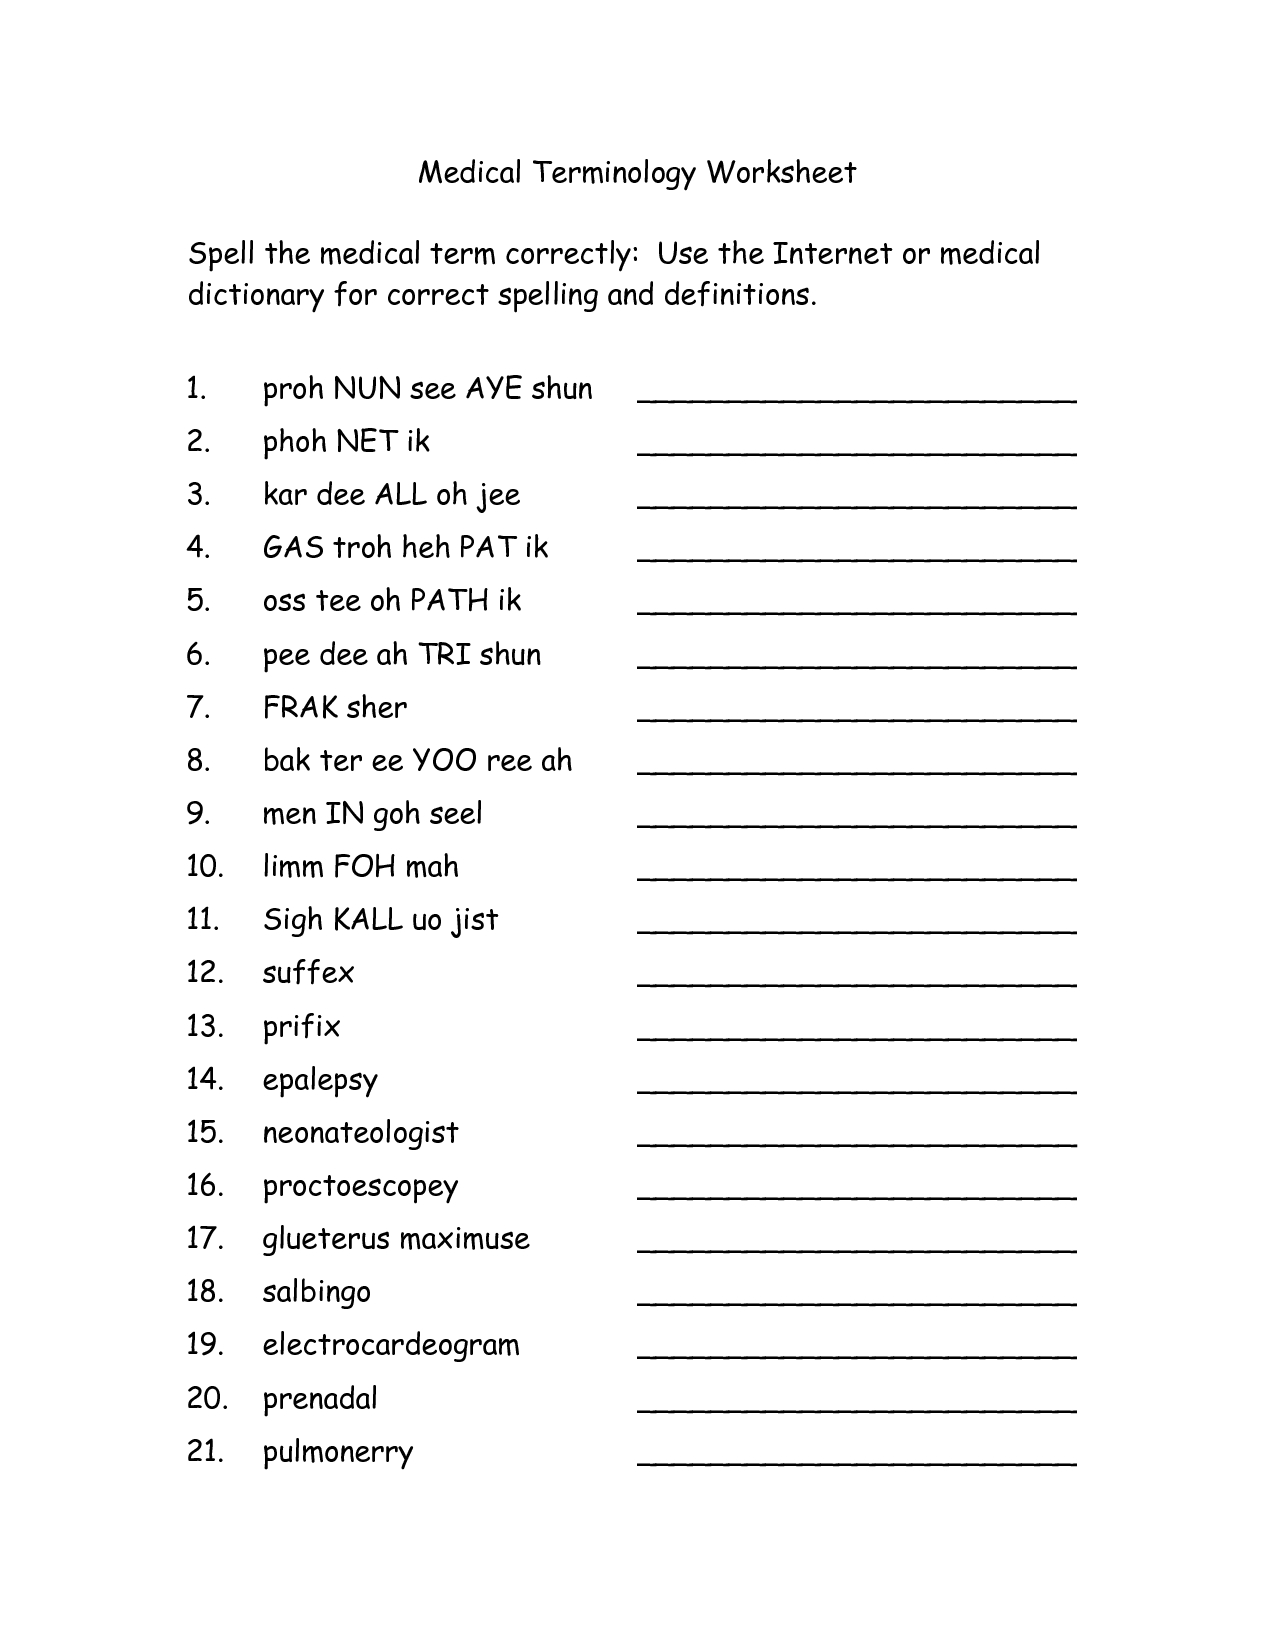 Free Printable Medical Terminology Worksheets Cakepins | Daily - Printable Medical Crossword Puzzles Free